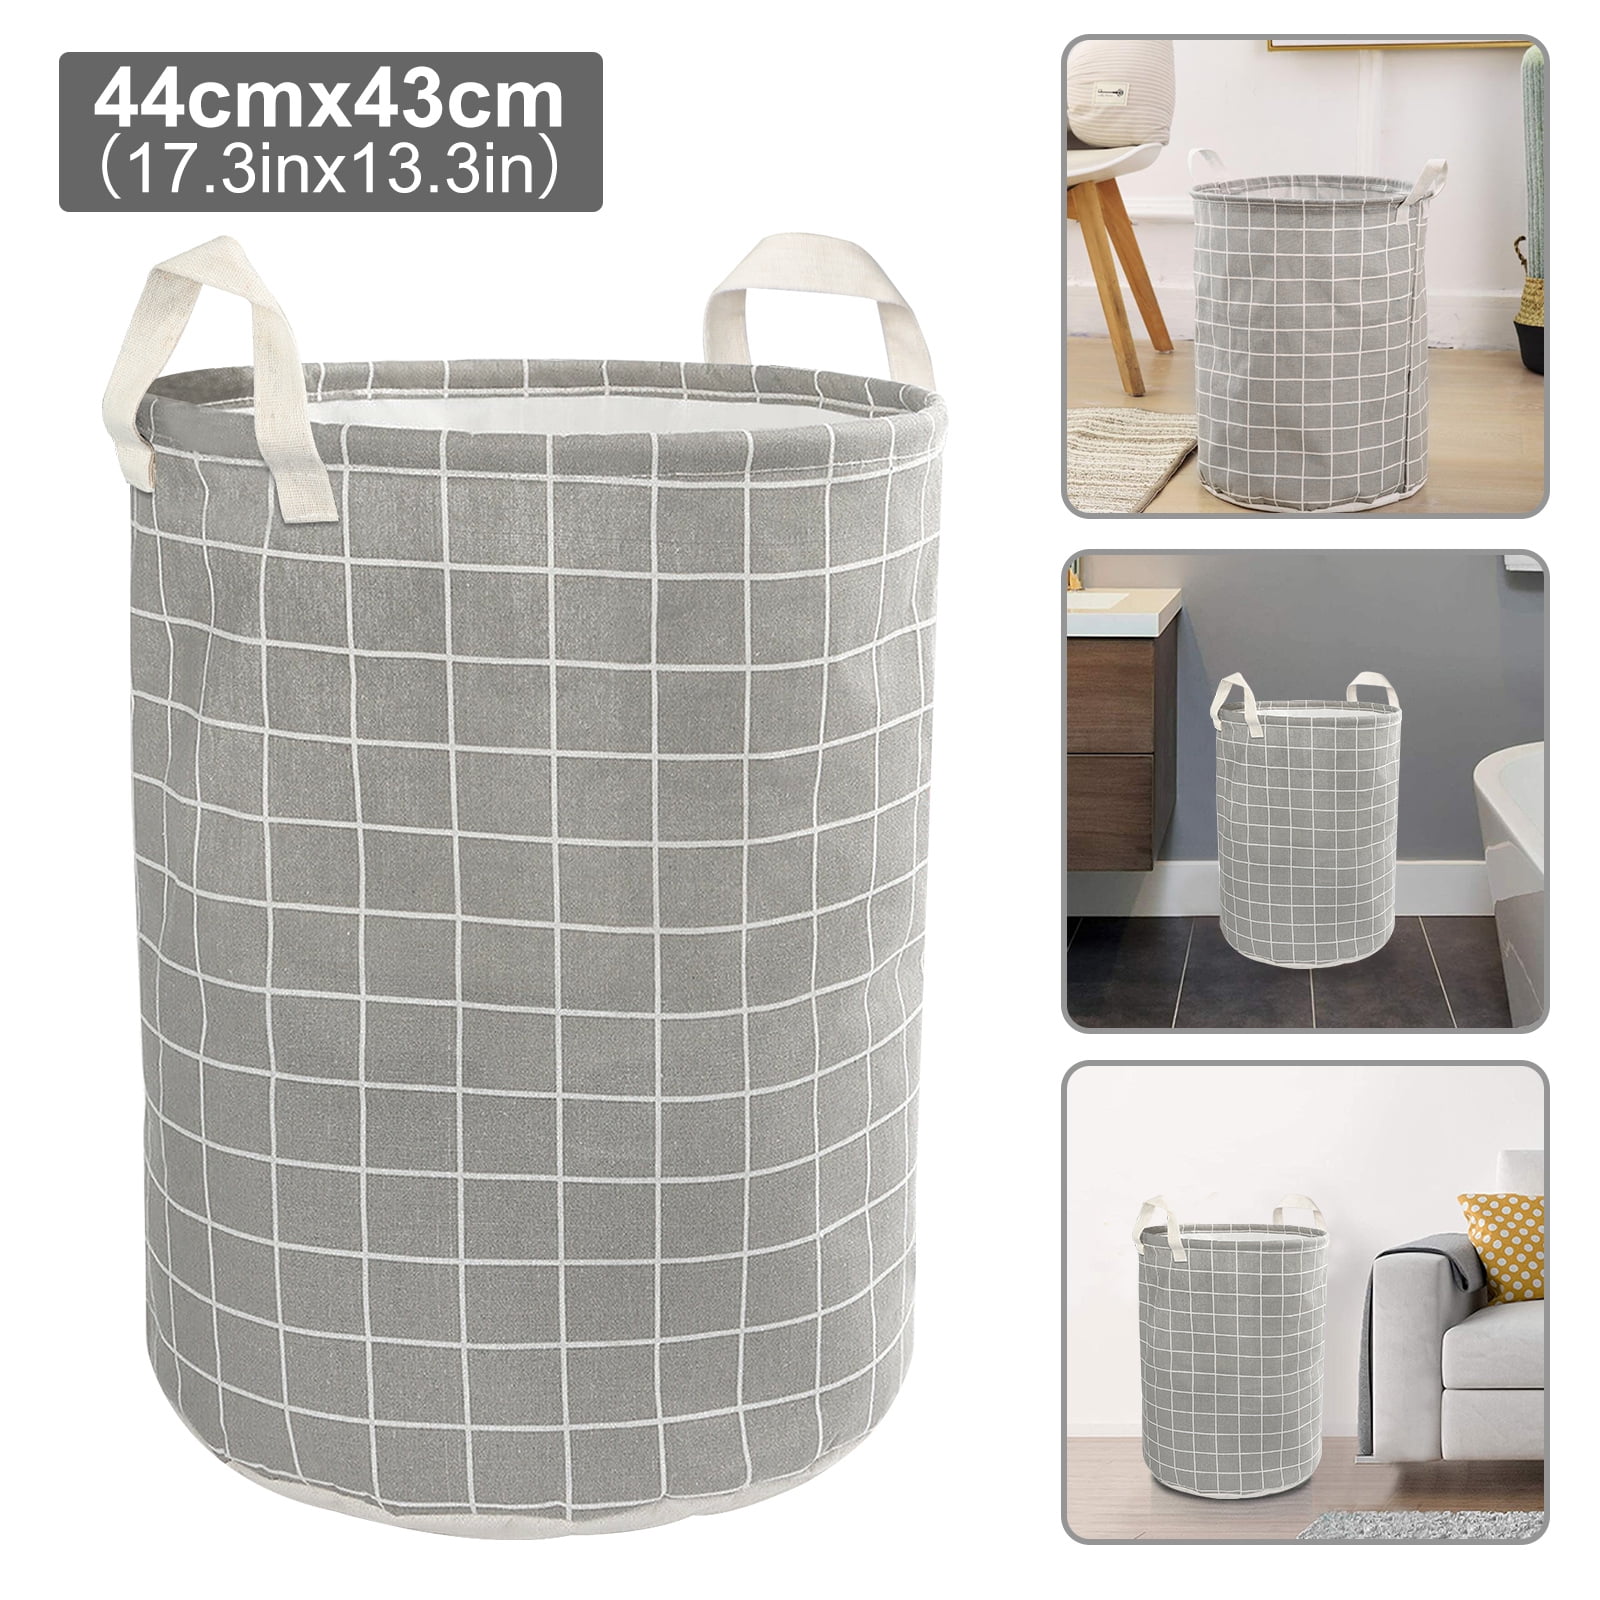 Collapsible Laundry Basket Foldable Washing Bin Hamper Dirty Clothes Bag Storage 